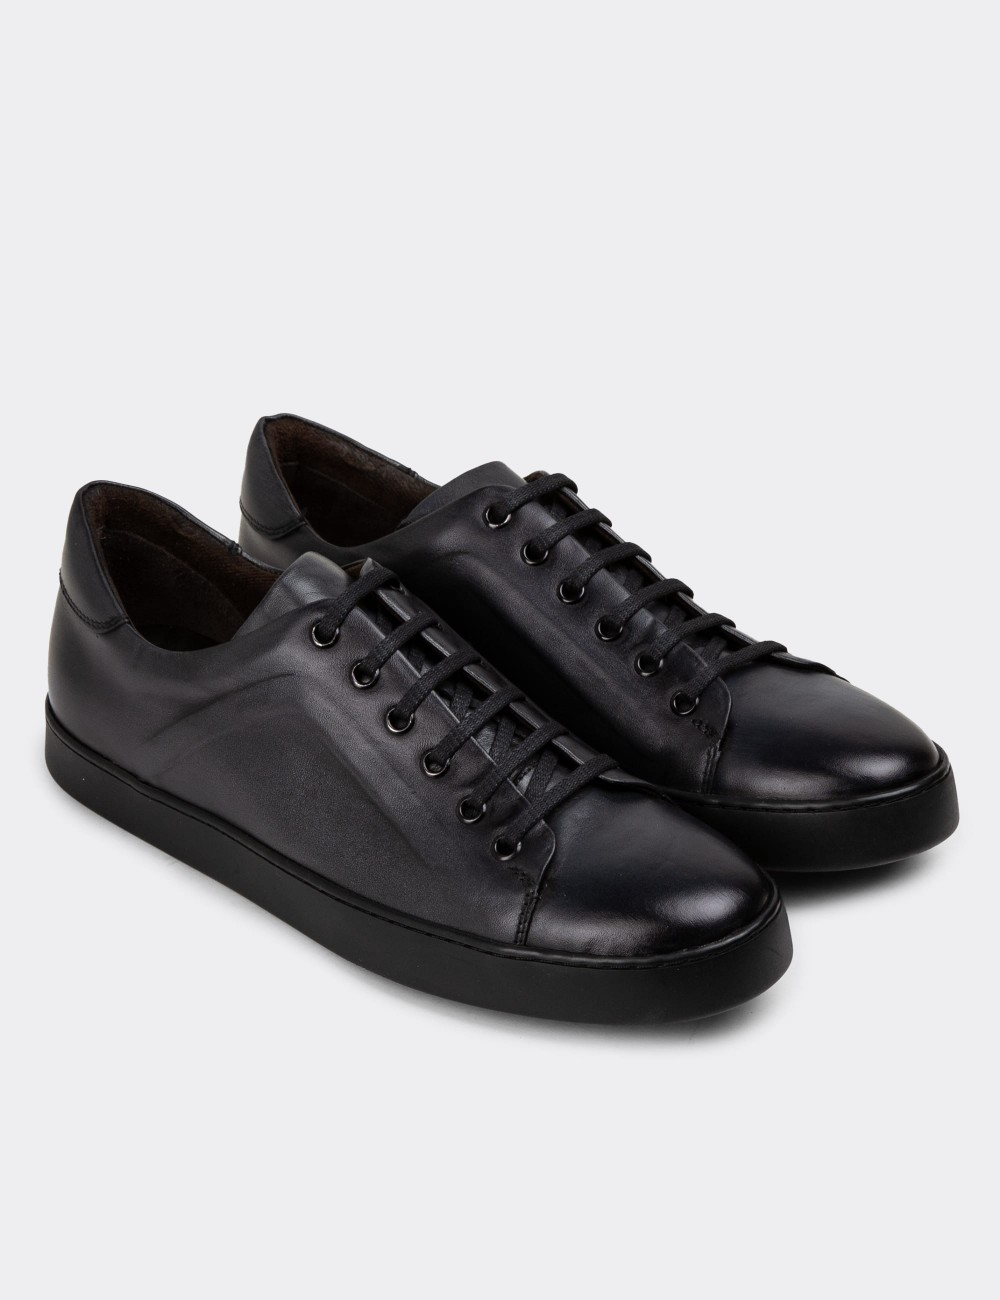 Anthracite Leather Sneakers - 01956MANTC01